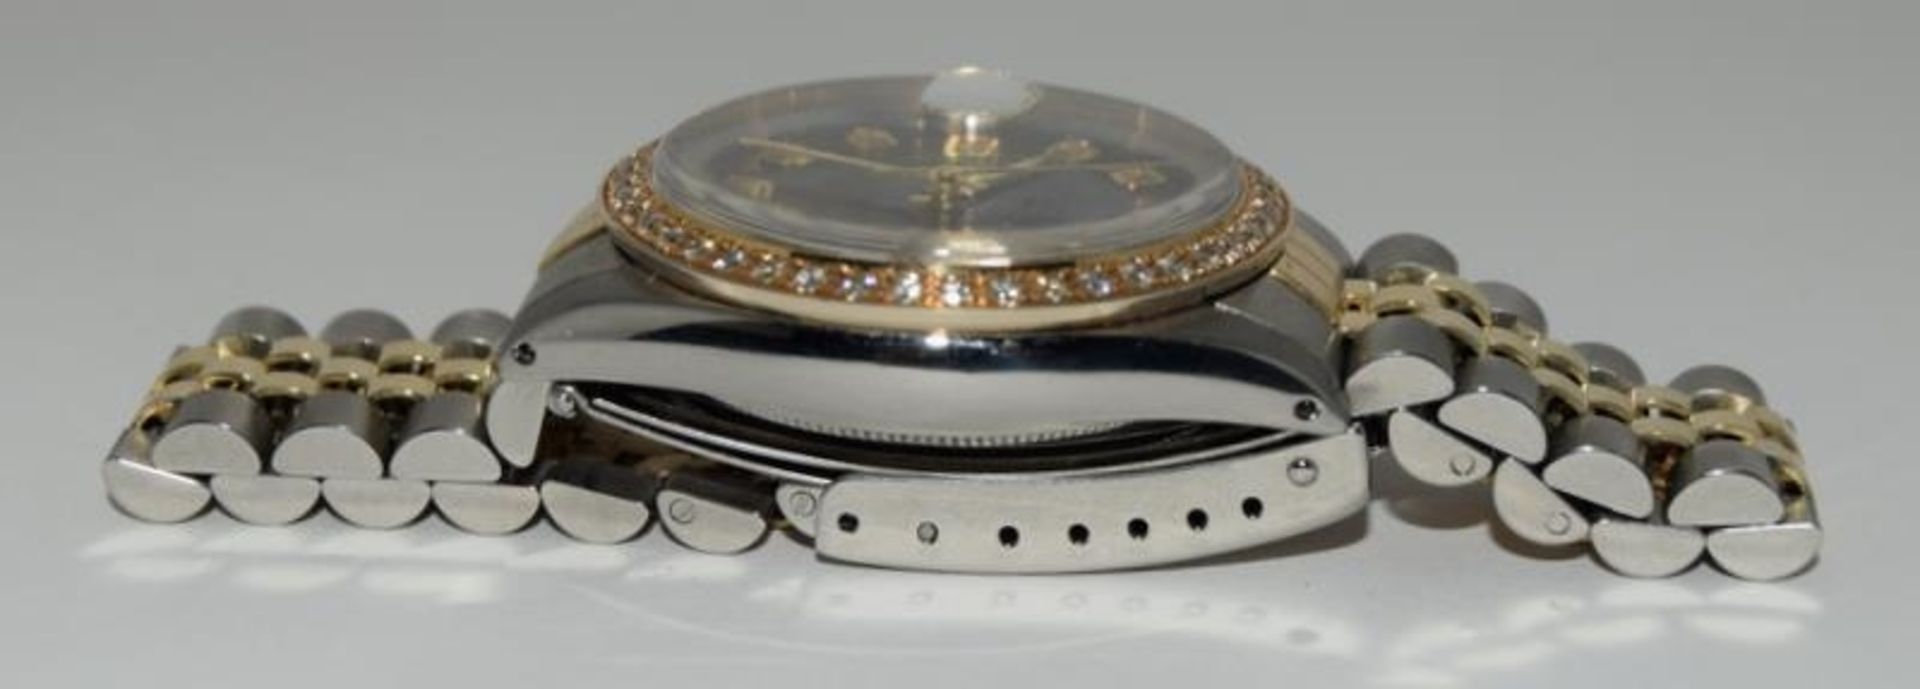 Rolex datejust diamond bezel and dial, mother of pearl dial, Bi-Metal wrist watch. (ref 106) - Image 3 of 10